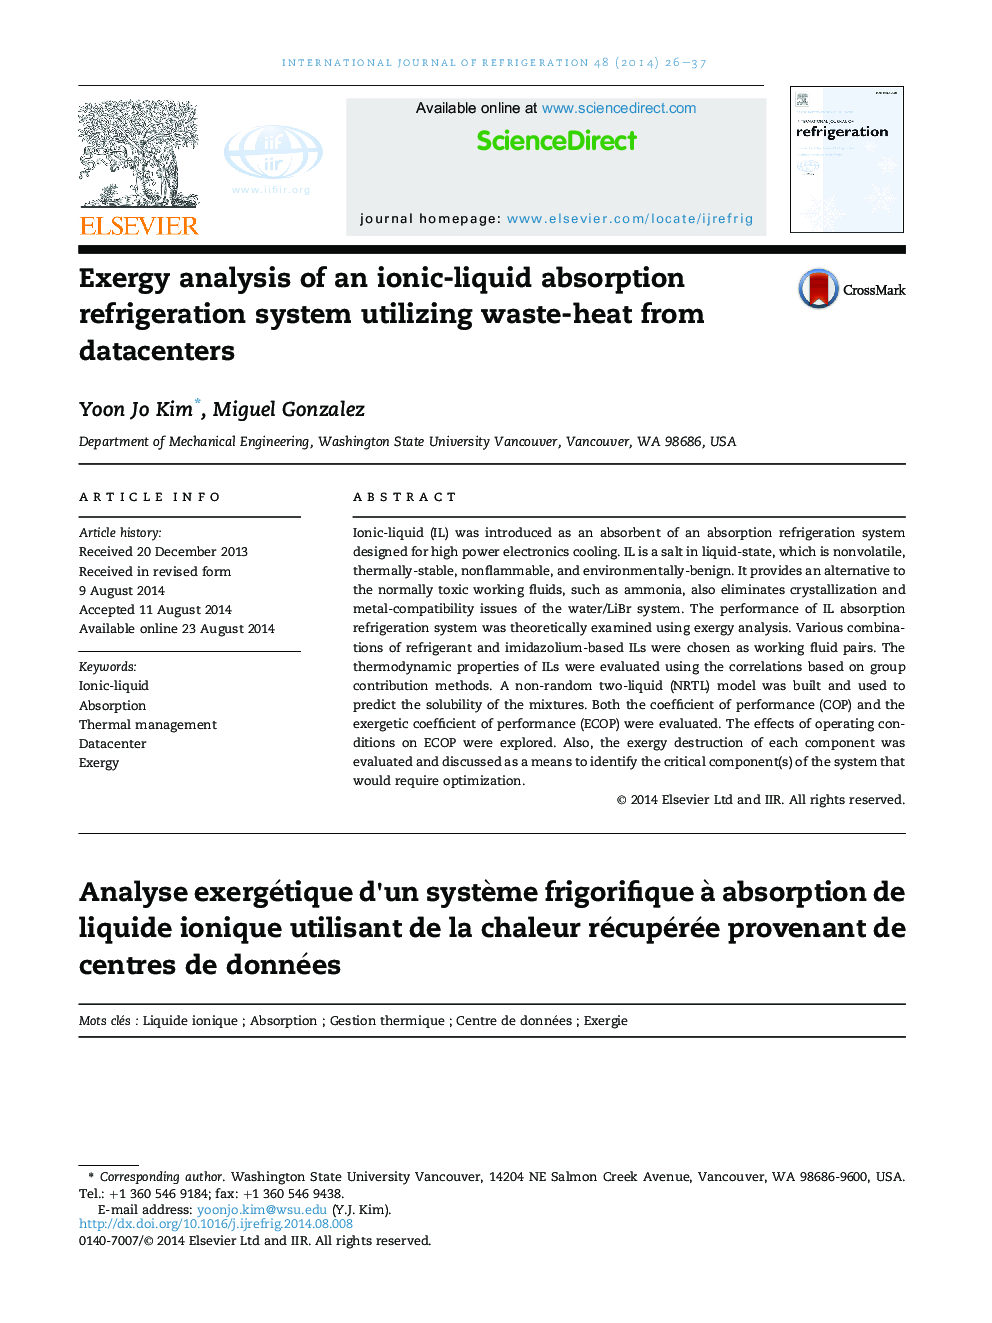 Exergy analysis of an ionic-liquid absorption refrigeration system utilizing waste-heat from datacenters